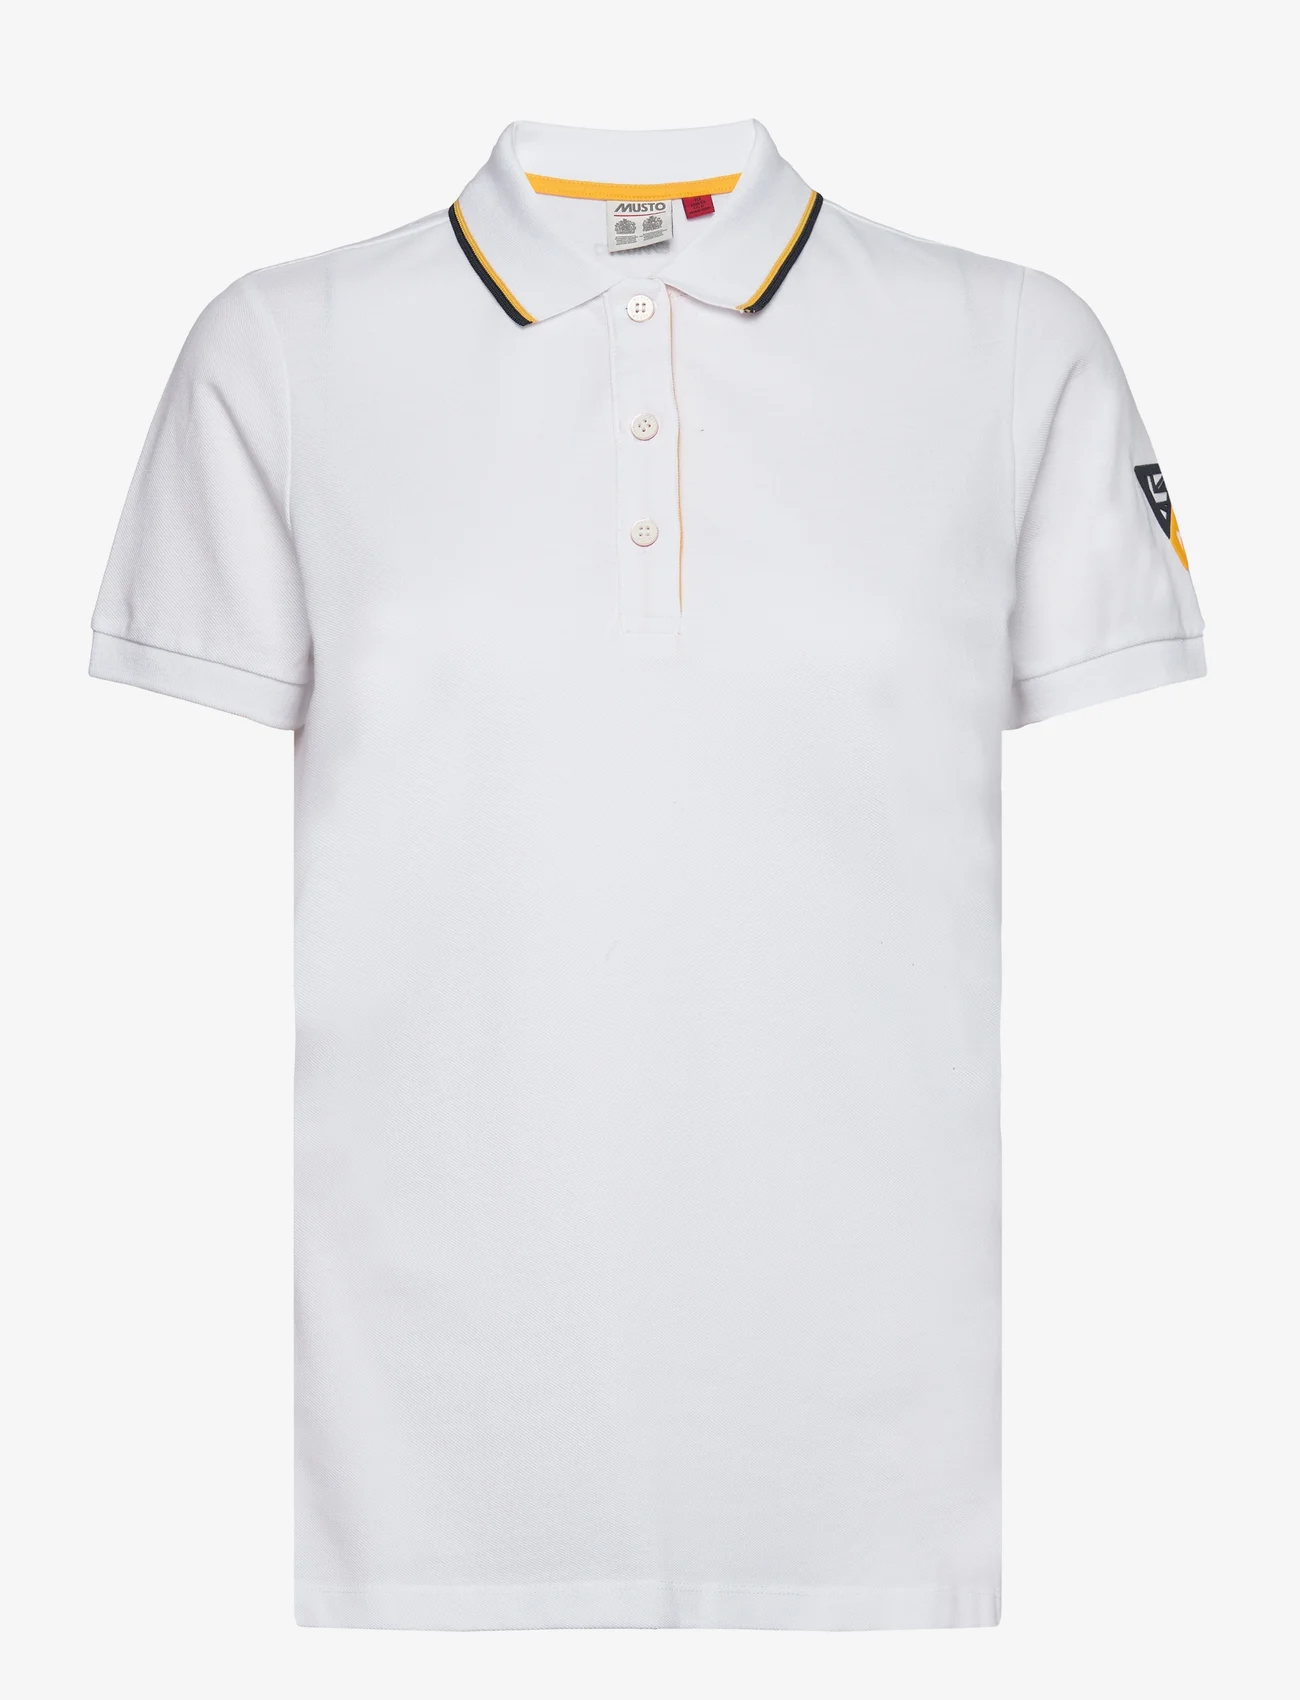 Musto - W MUSTO POLO 2.0 - t-shirt & tops - white - 0